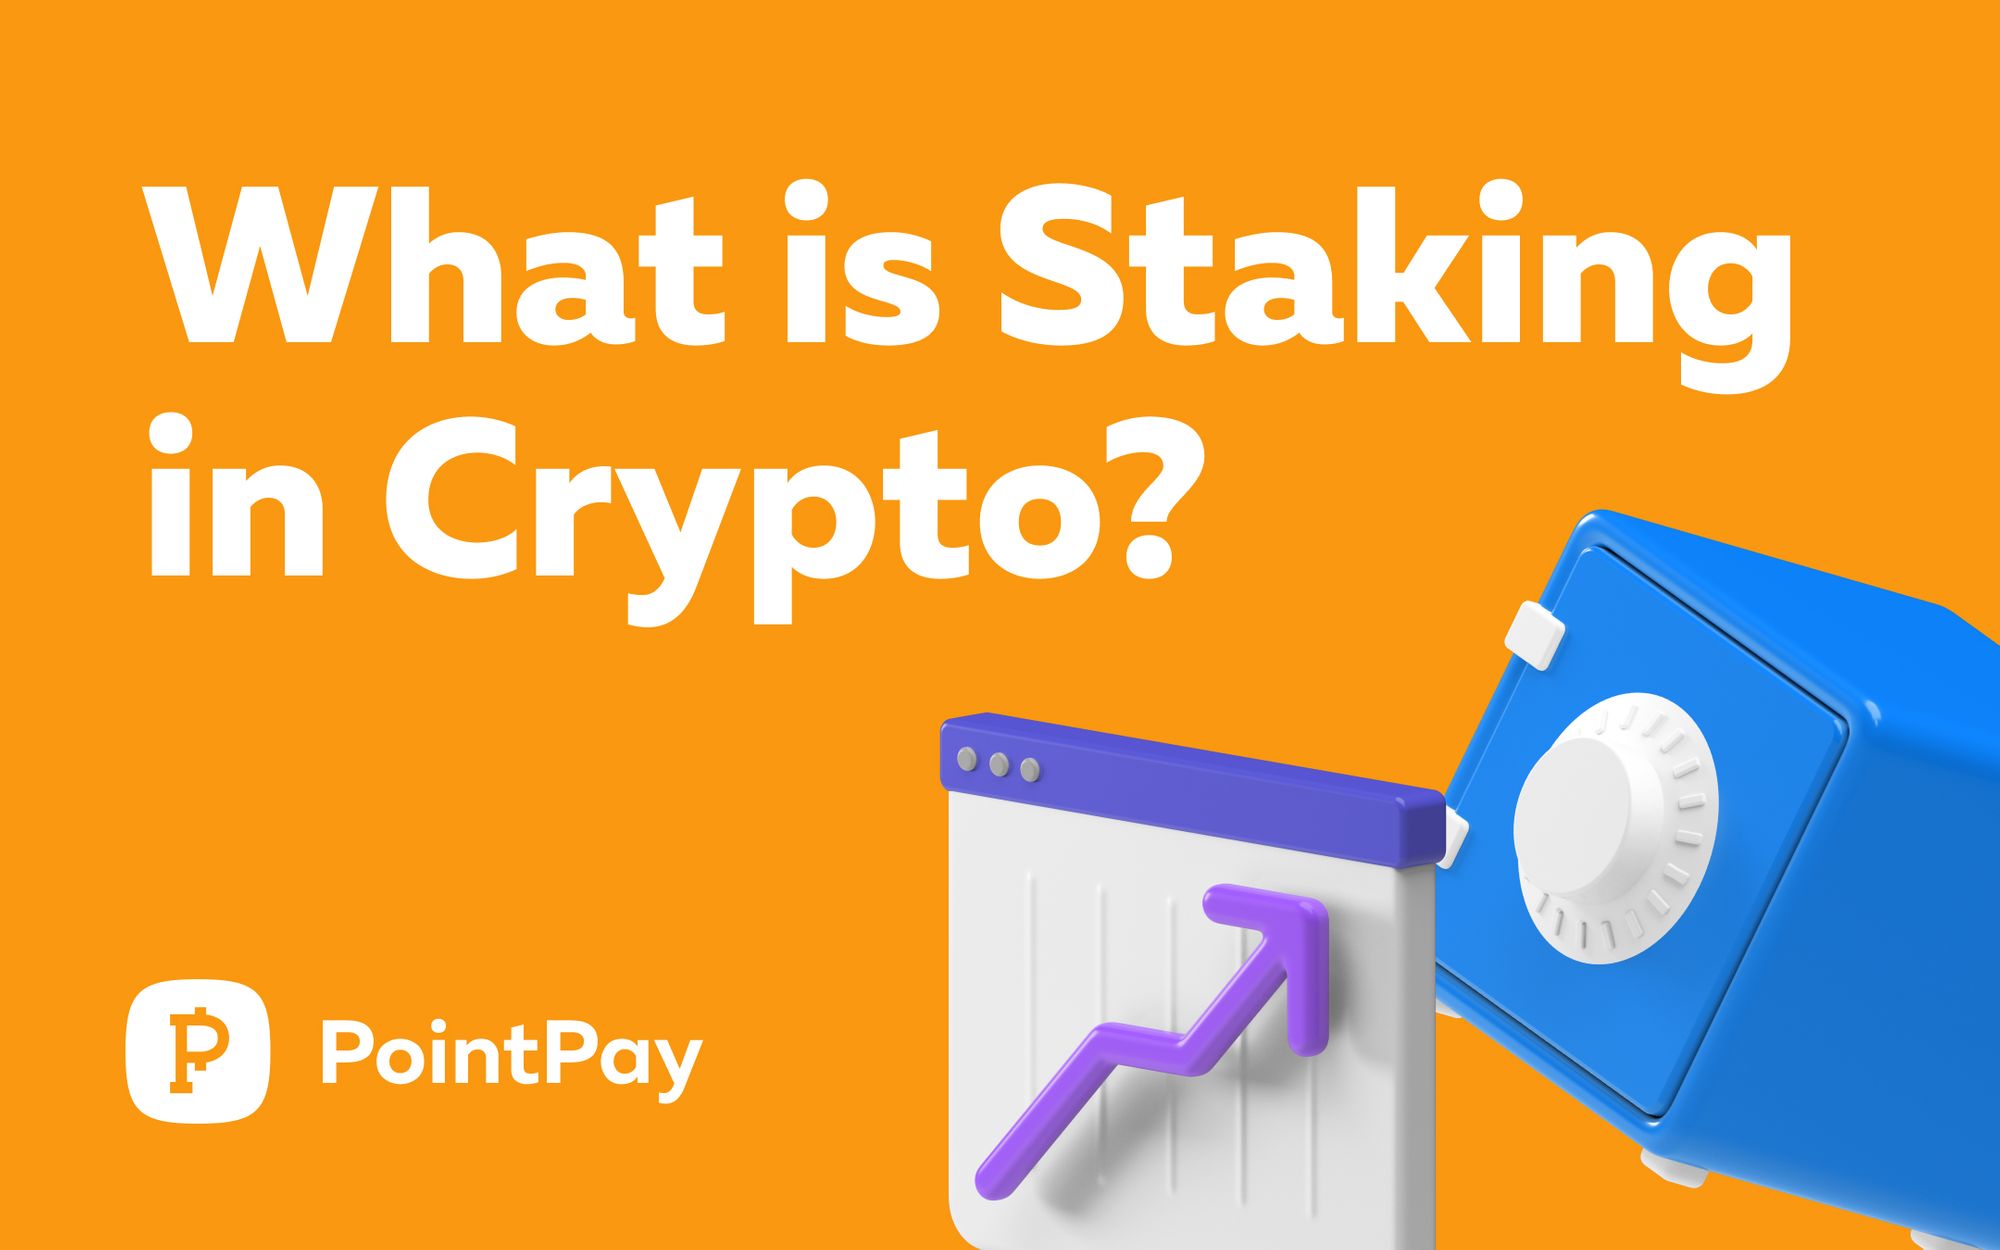 What is staking in crypto?